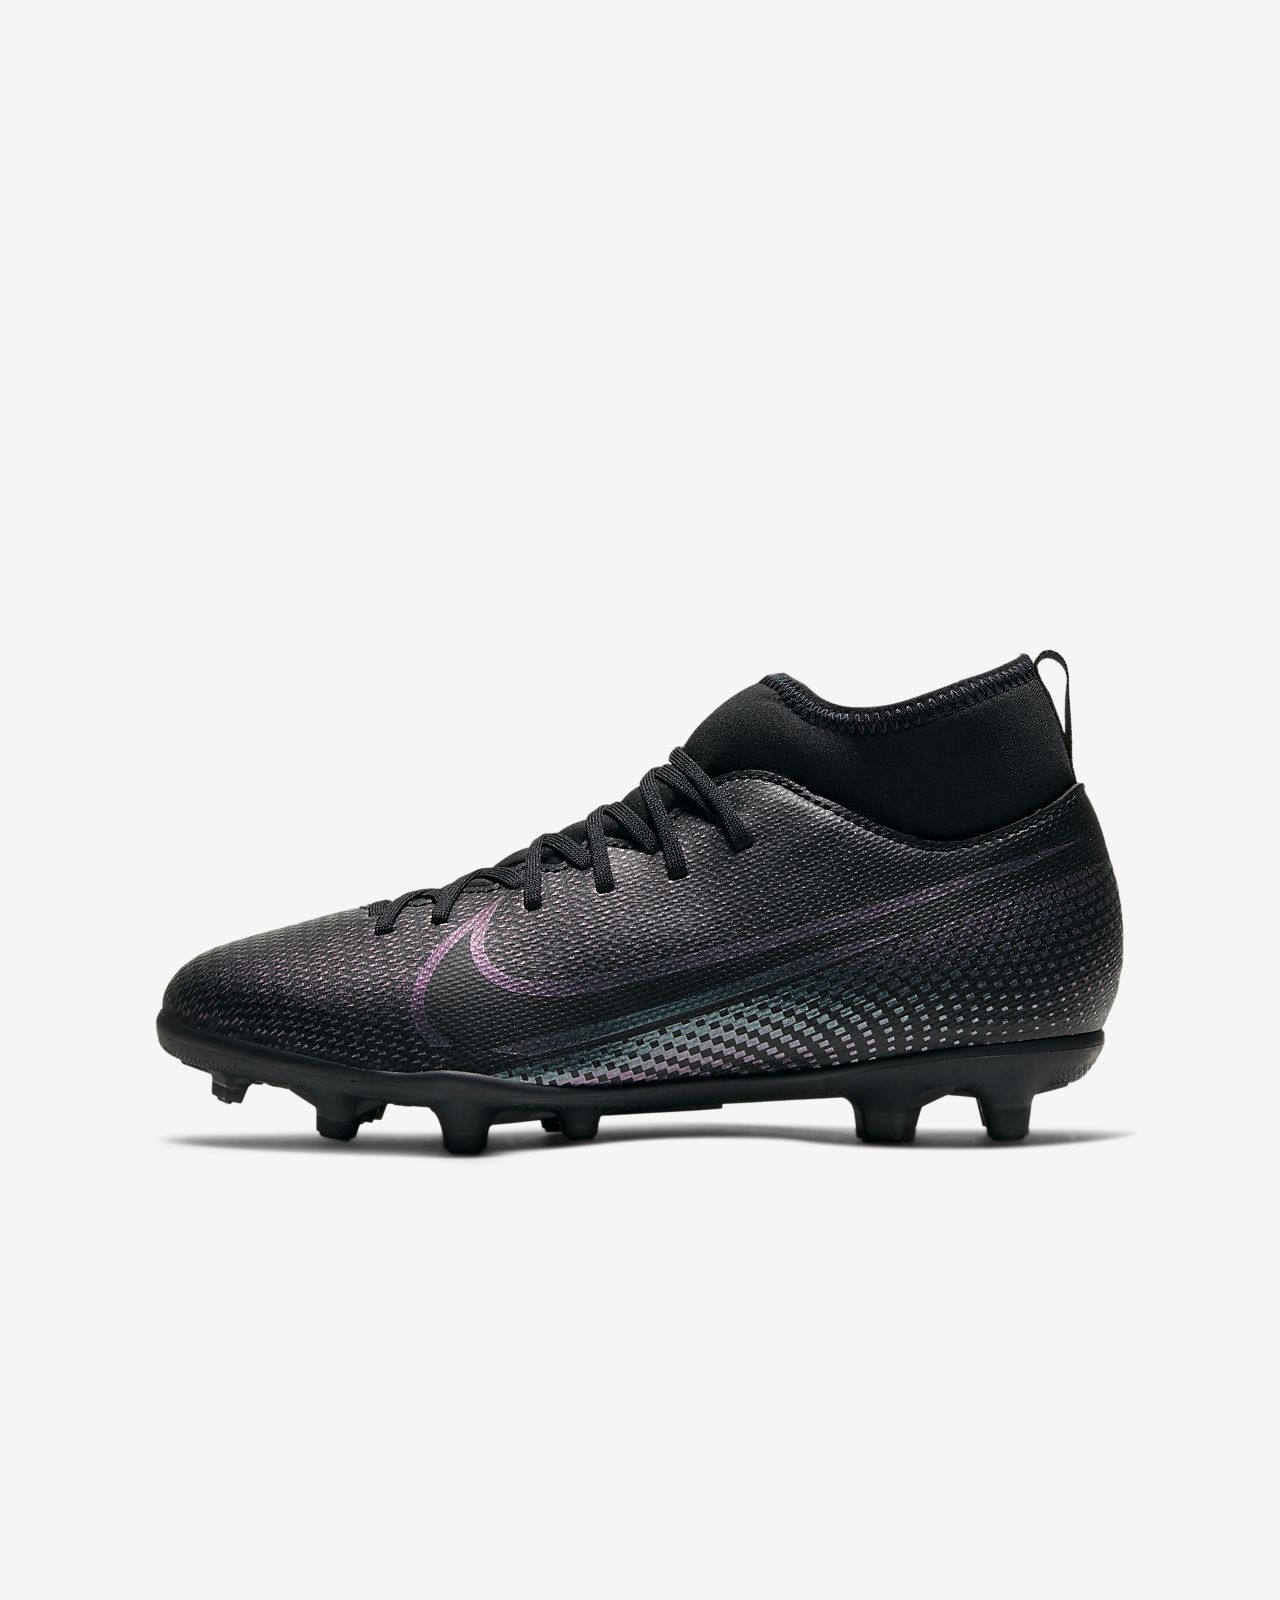 Nike Mercurial Superfly 6 Club MG Soccer Cleats Amazon.in.